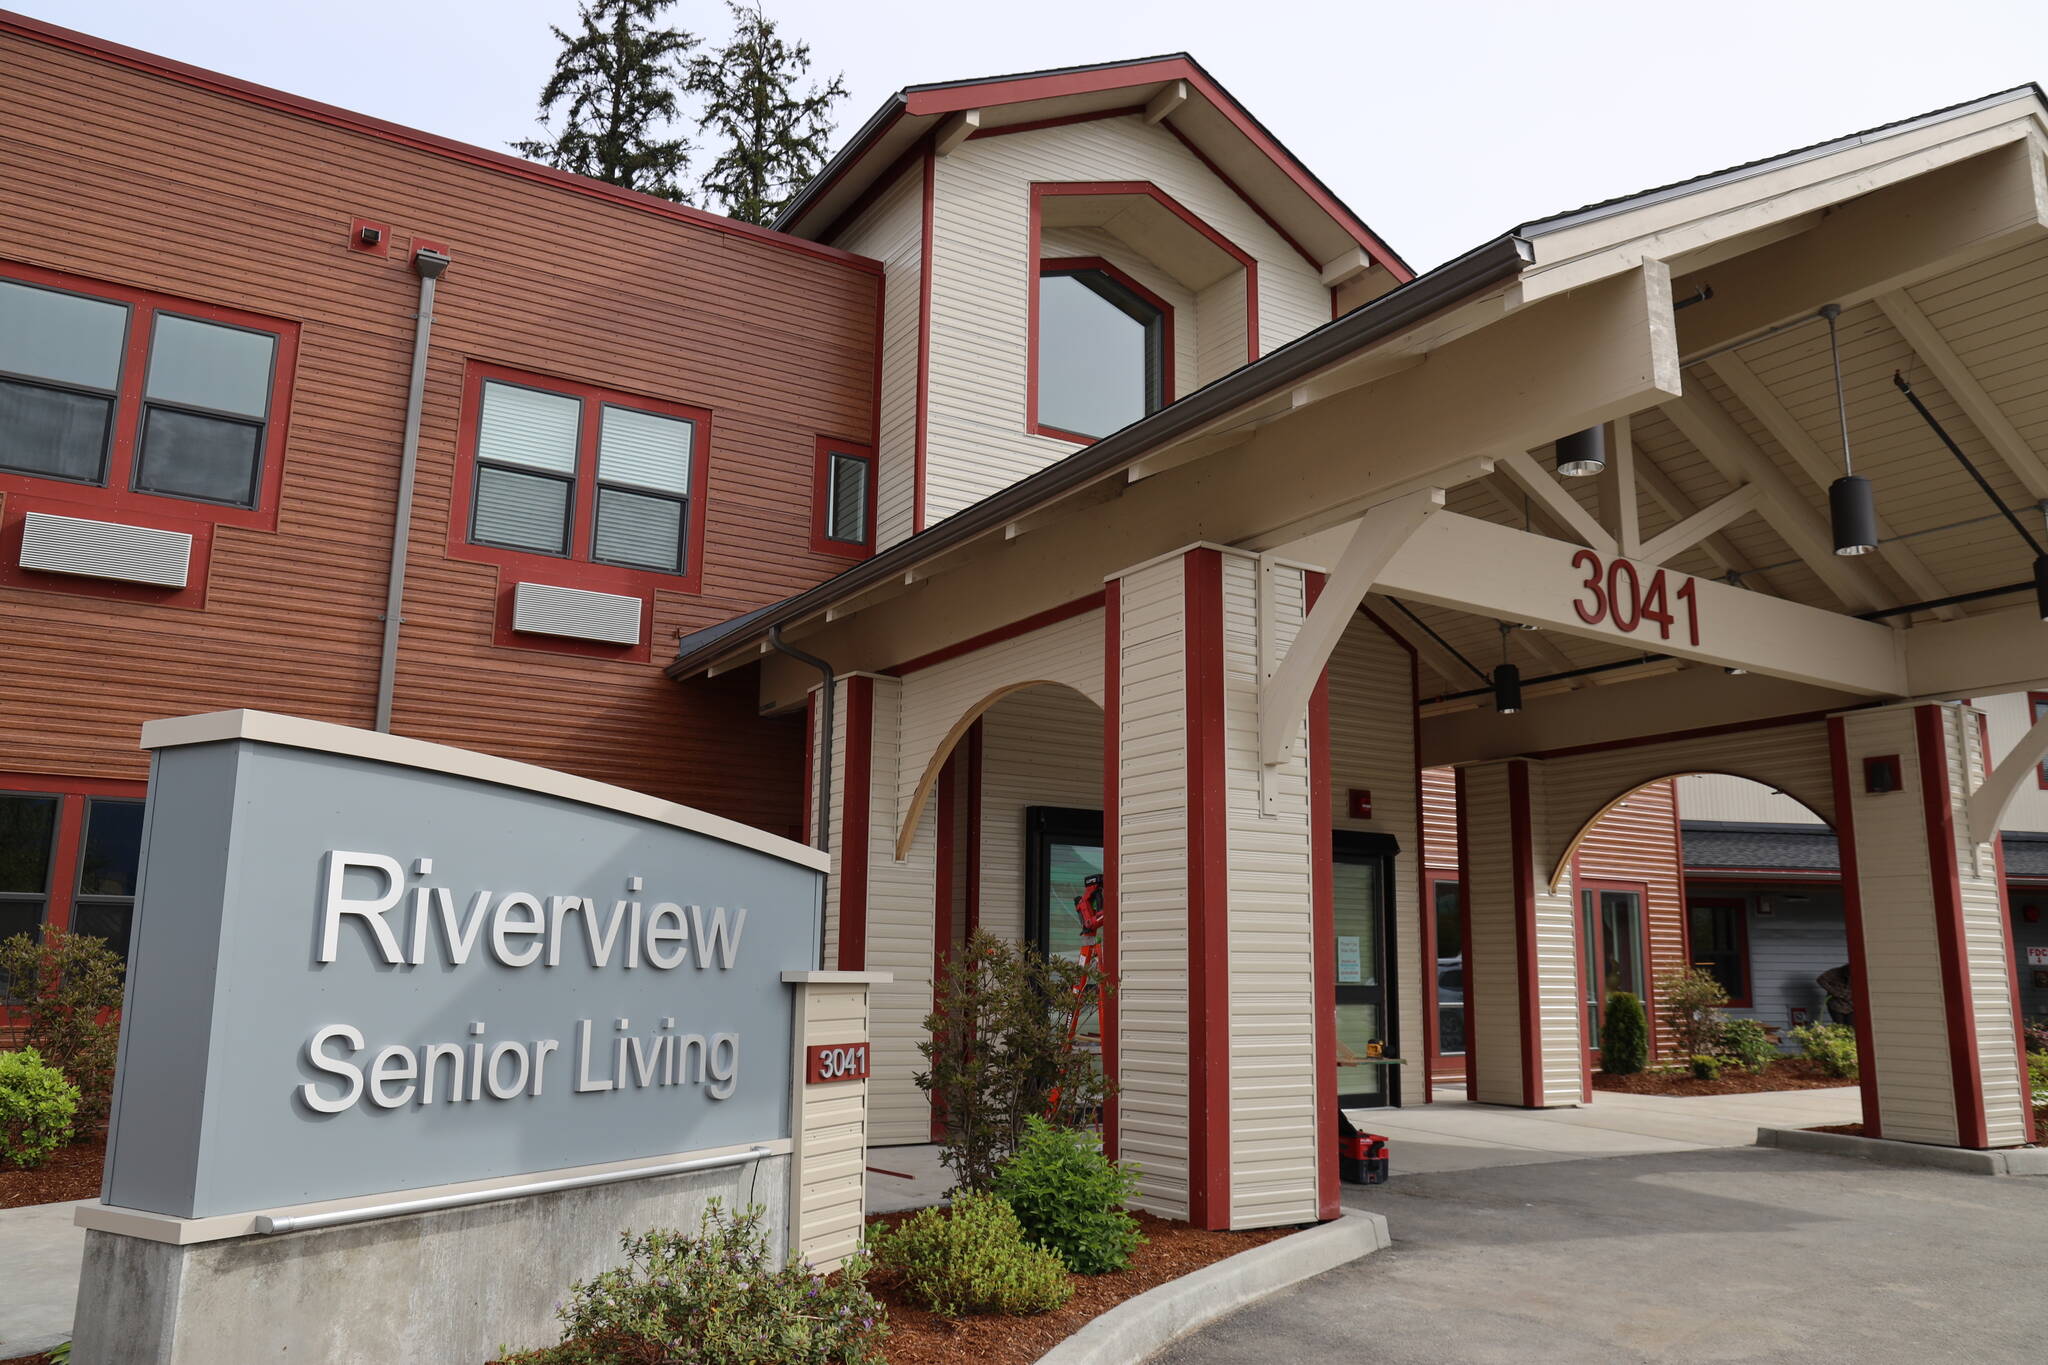 The Riverview Senior Living complex, built on a site purchased in 2019 and where construction began in September of 2021, is now open for residents who are moving in during the coming months. (Clarise Larson / Juneau Empire)